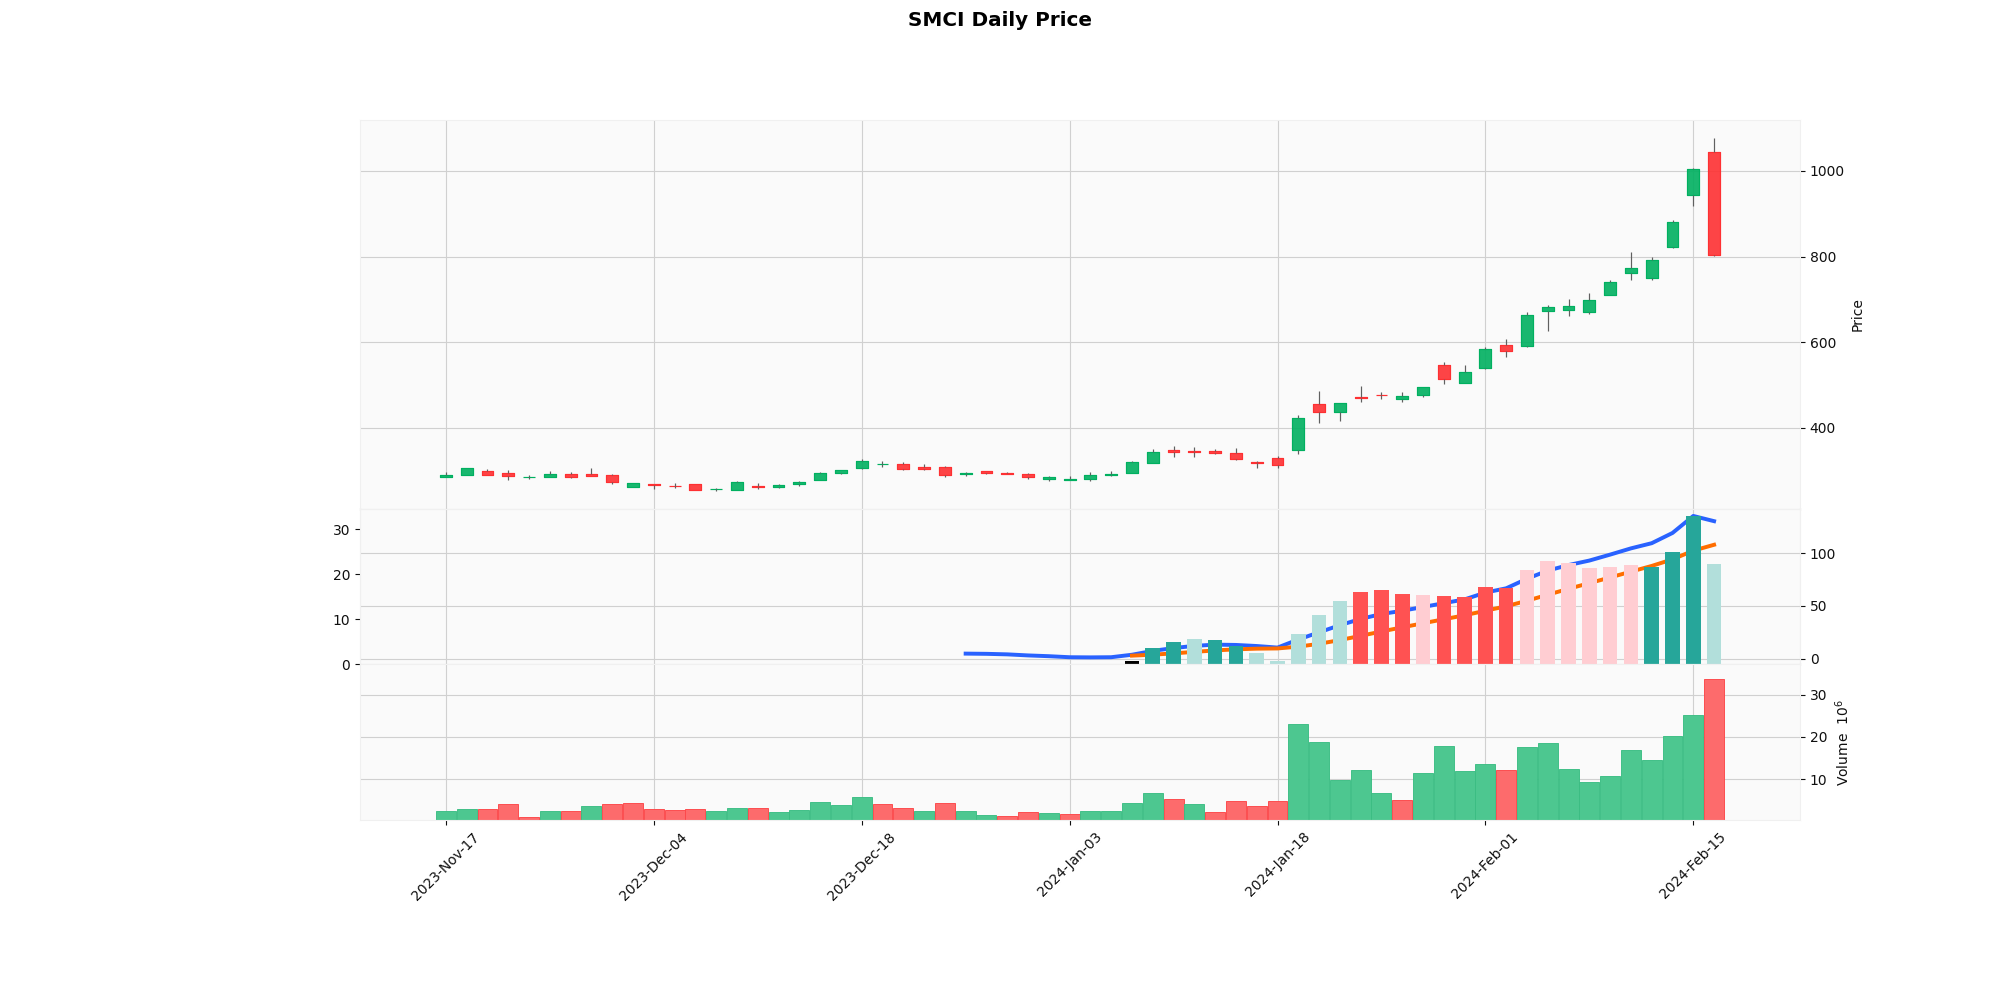 SMCI Daily price after selloff